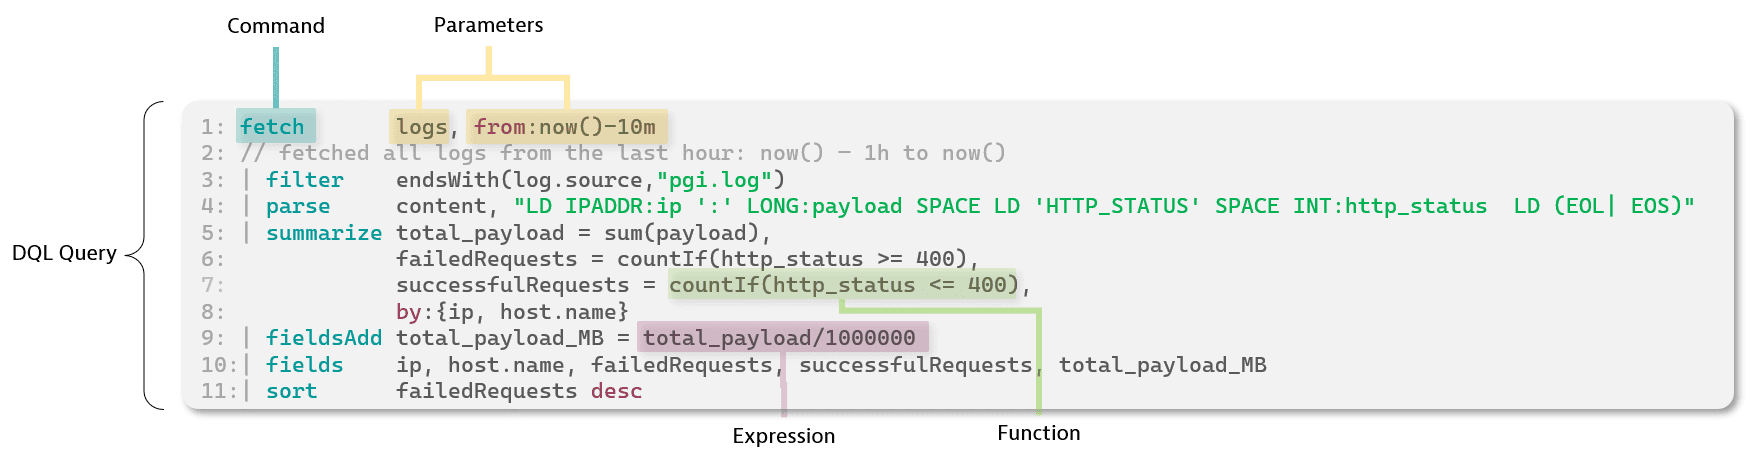 an example DQL query with explanations